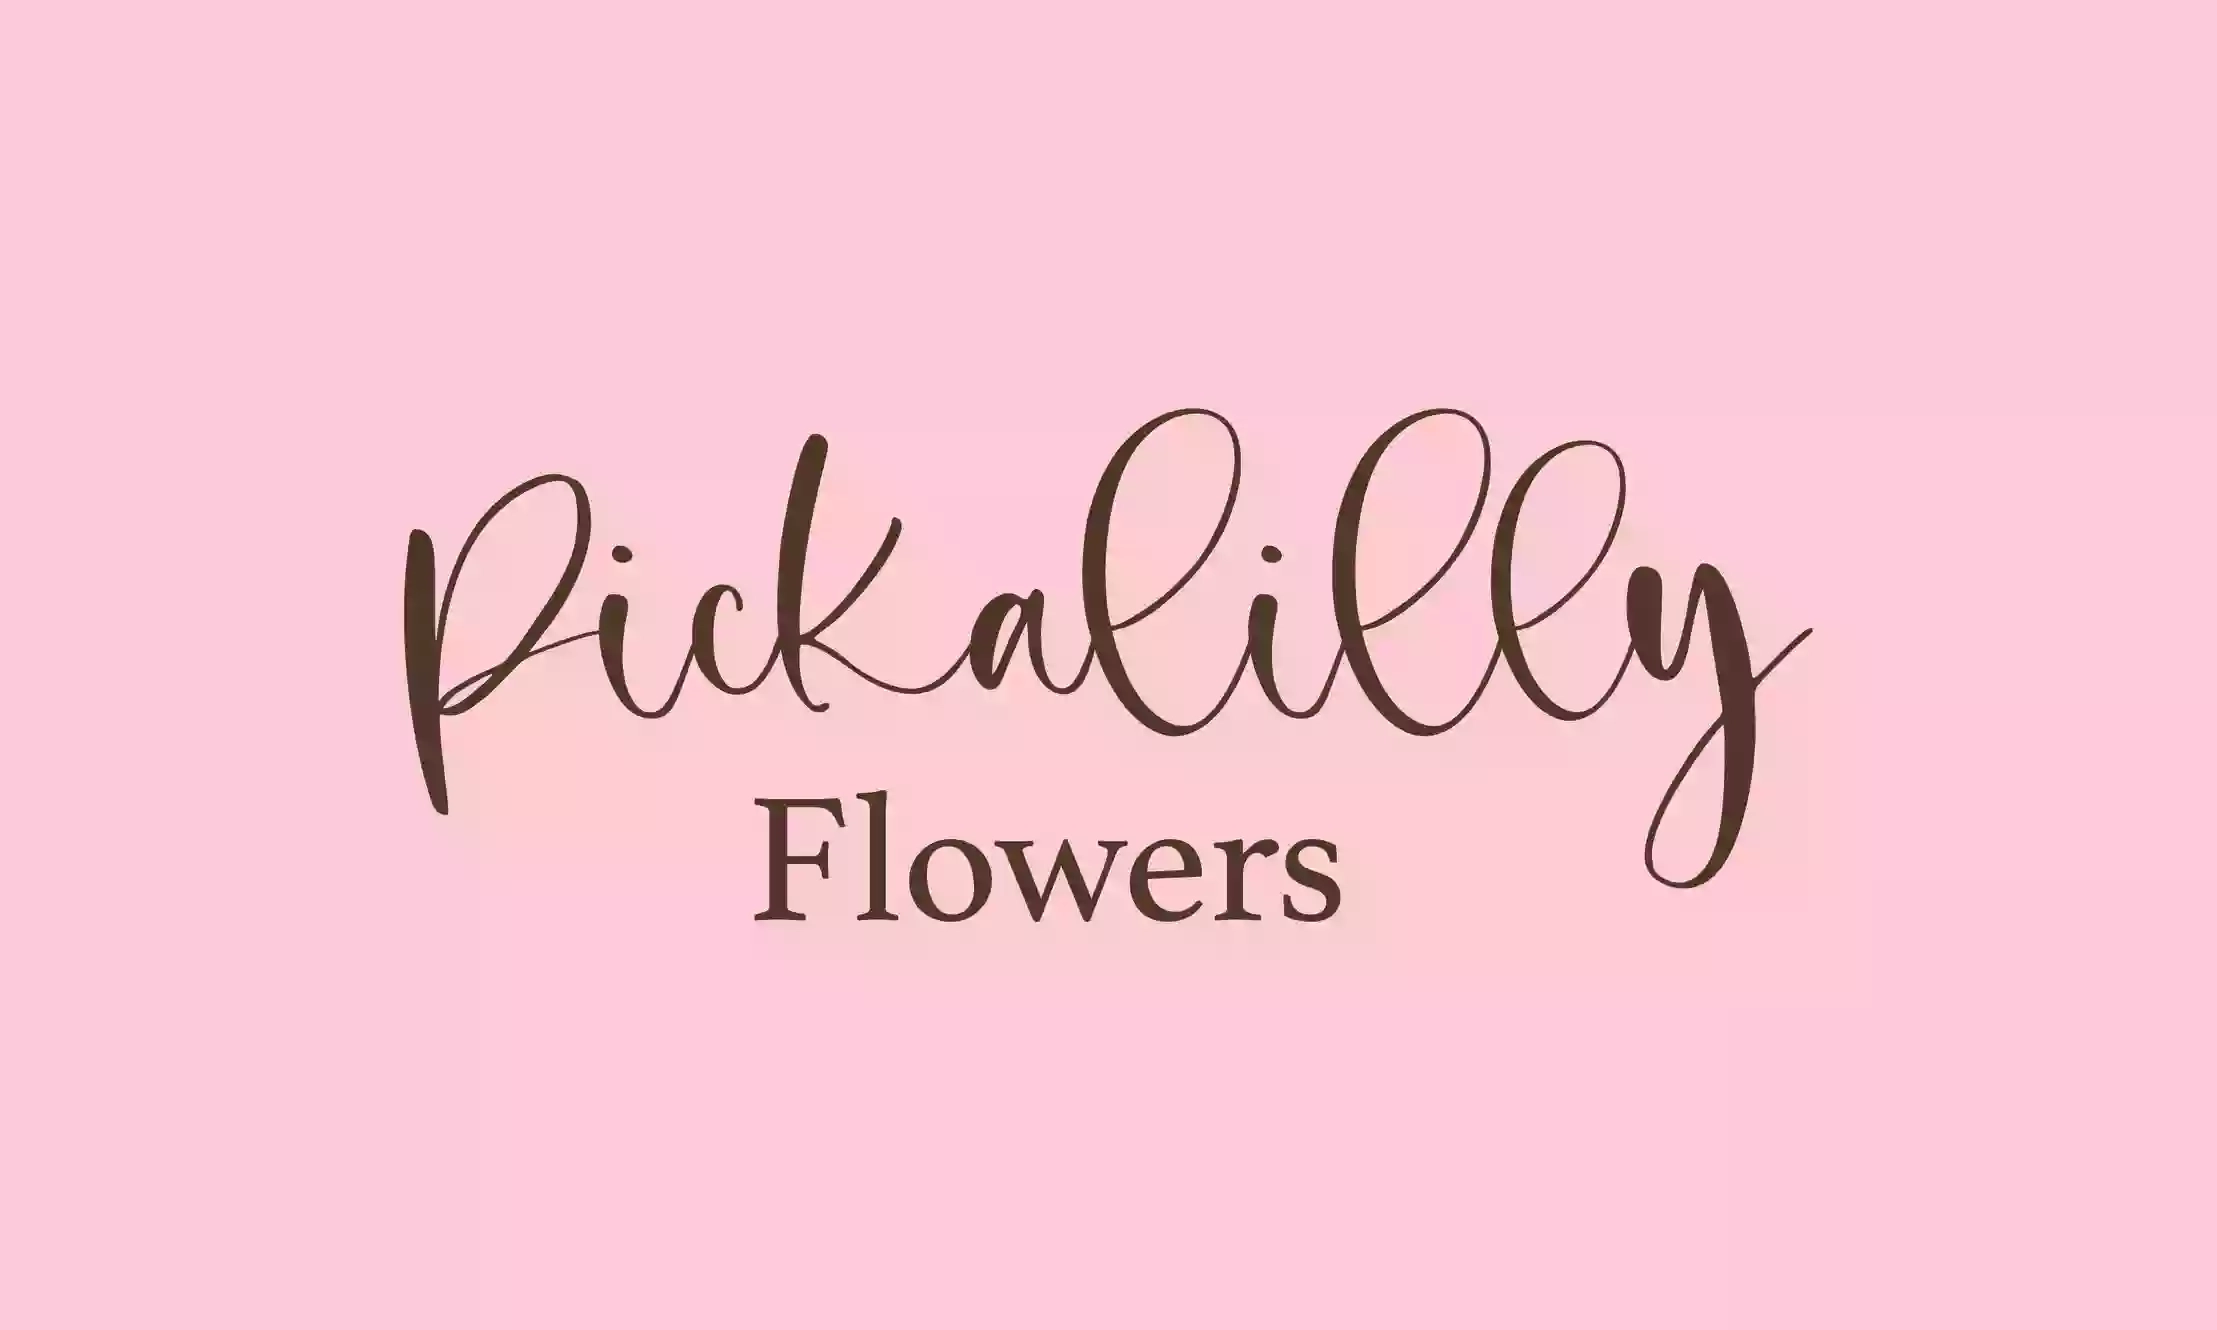 Pick-A-Lilly Flowers